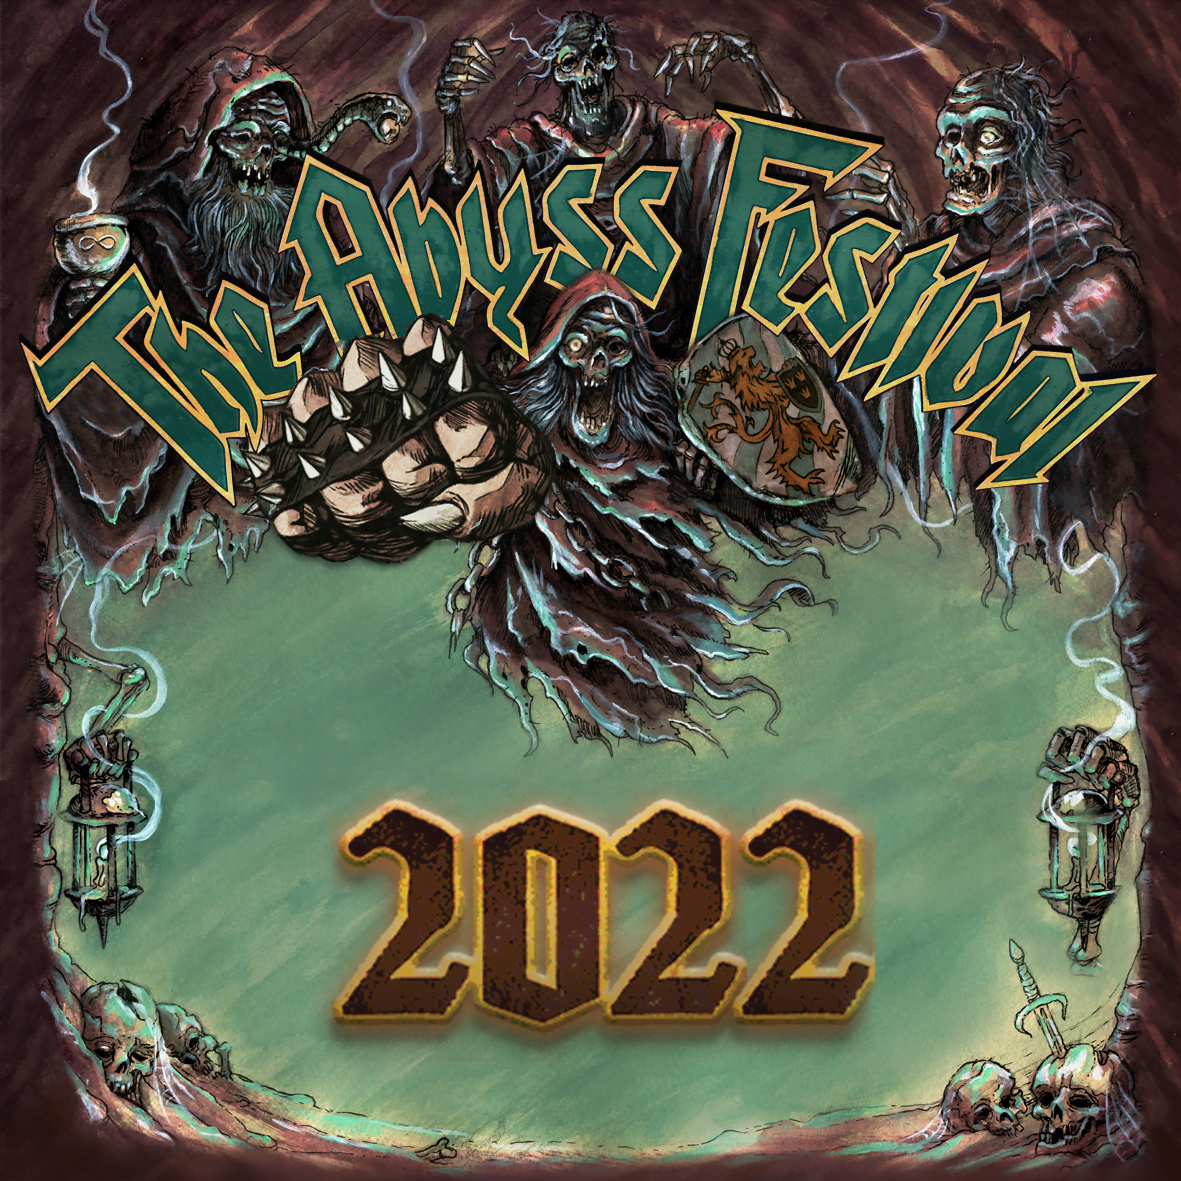 The Abyss - Festival moved to early 2022